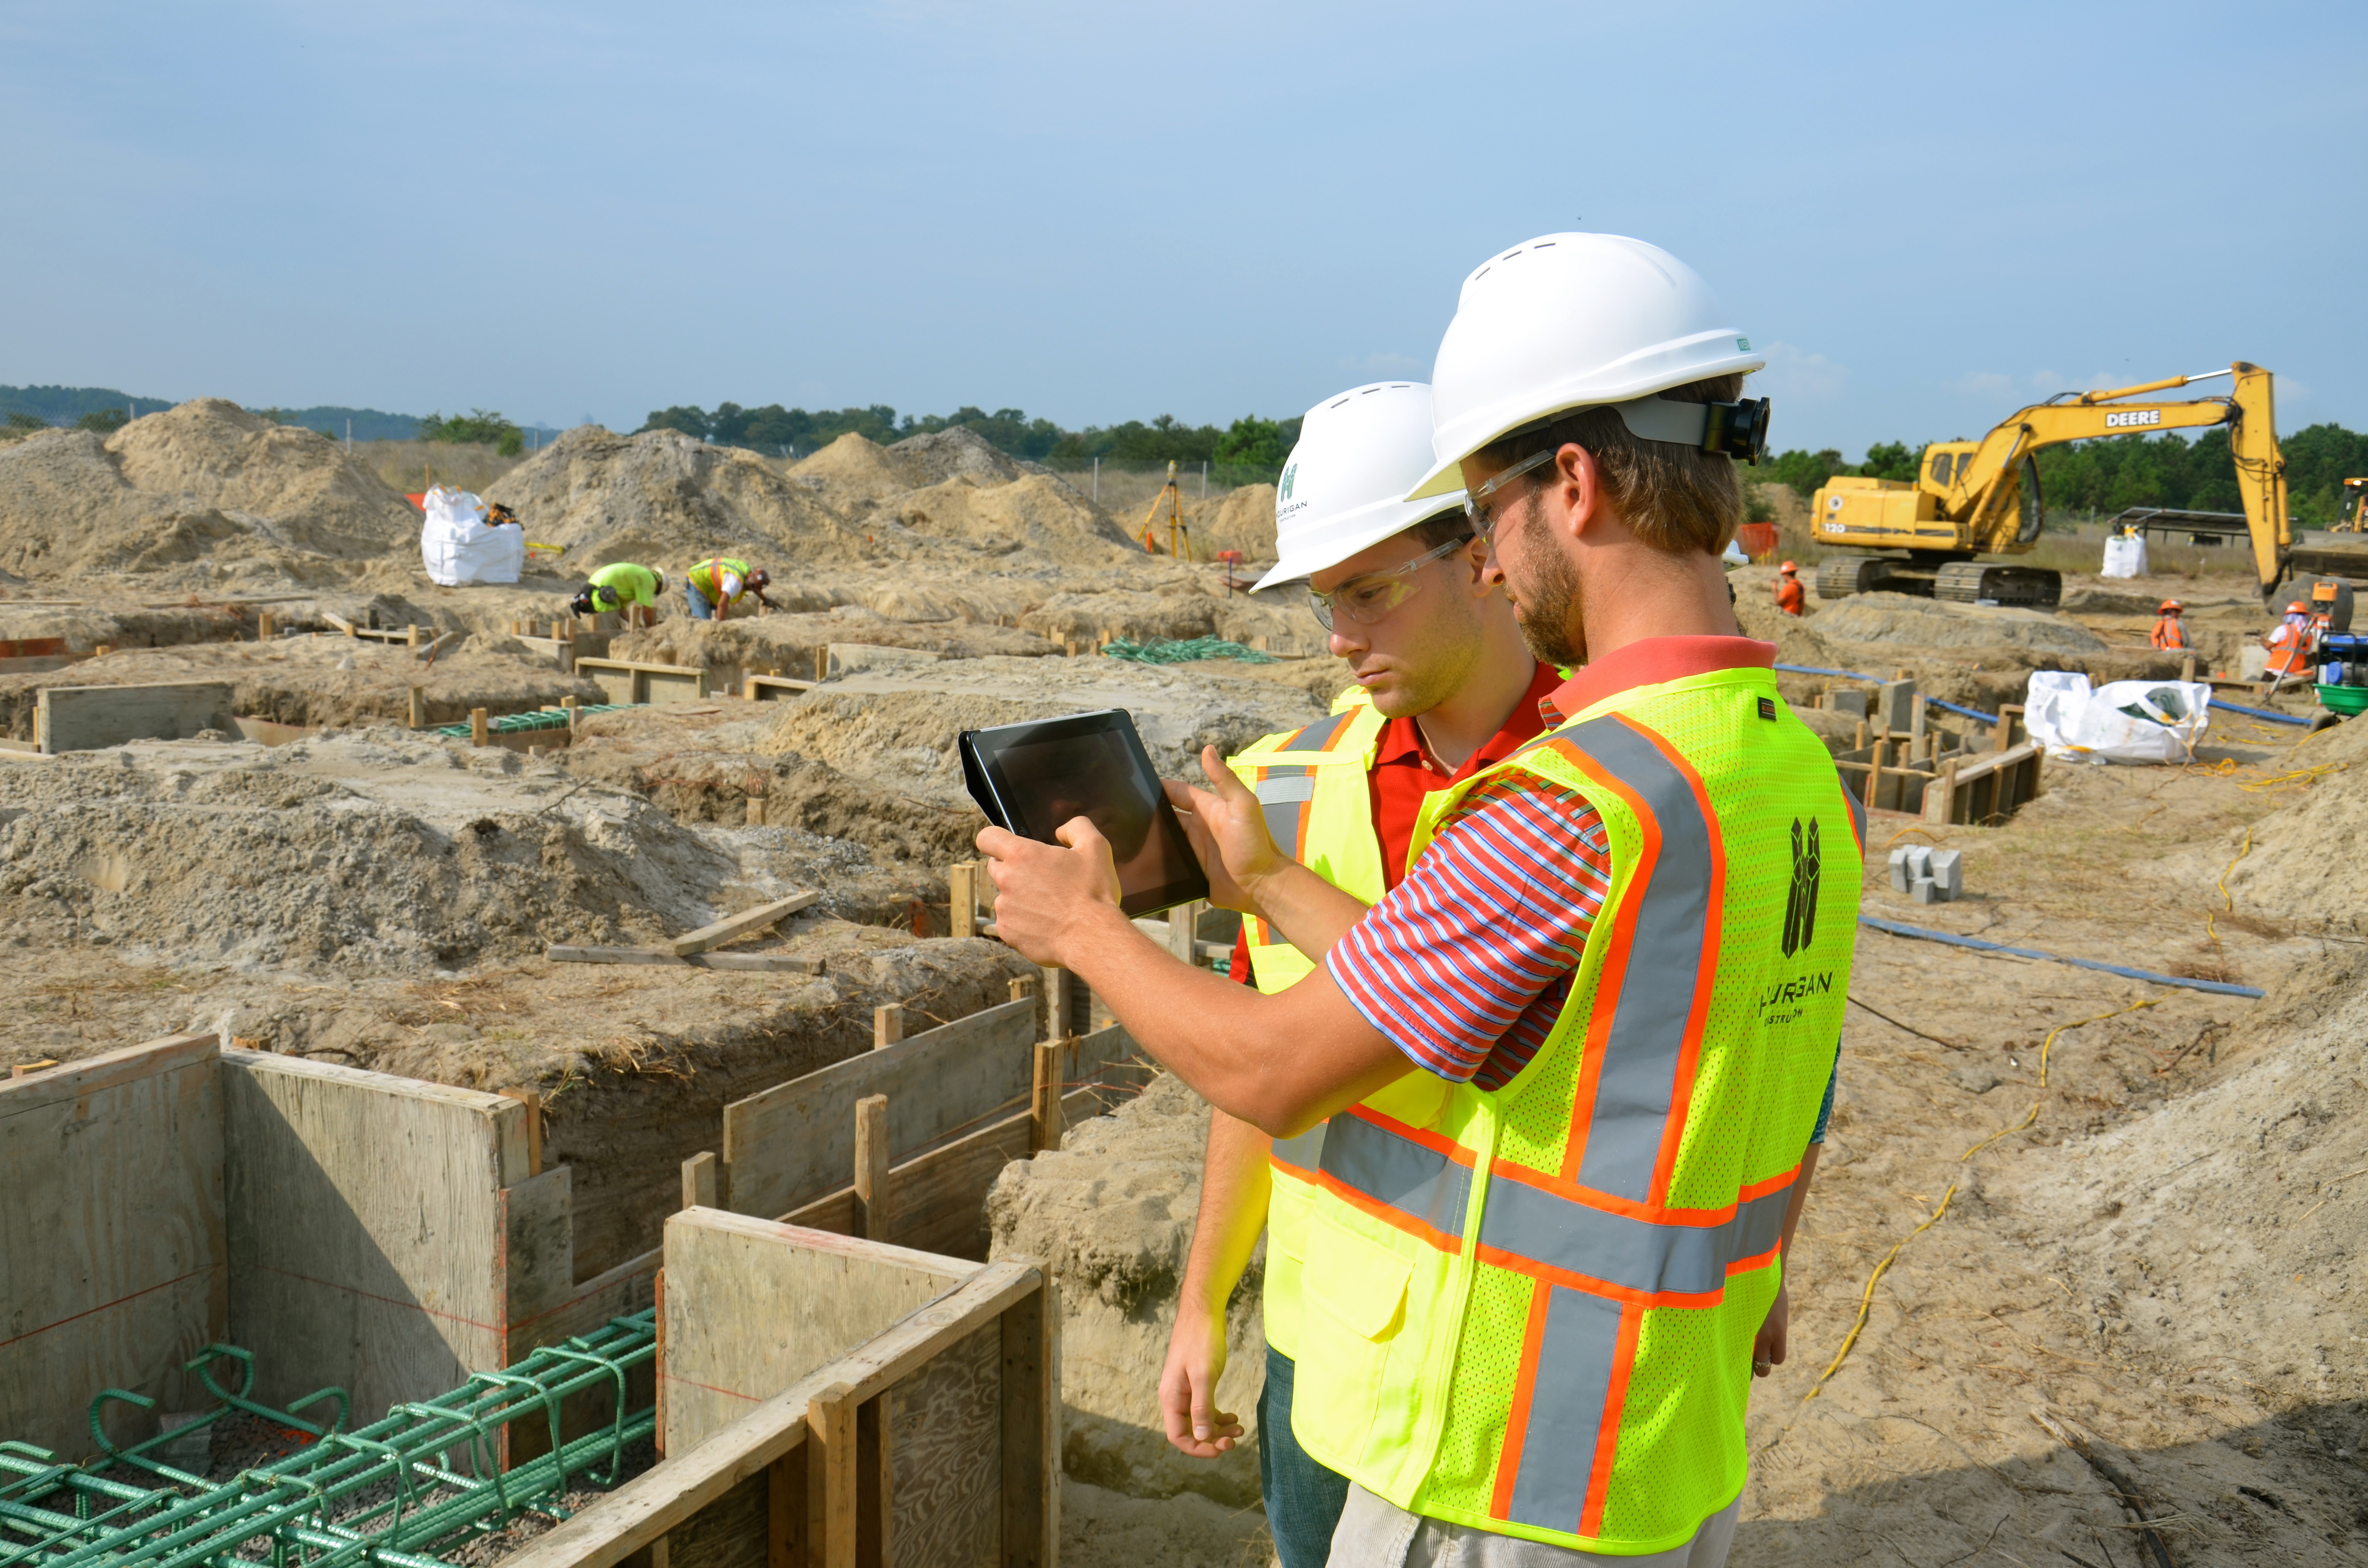 Two students in construction gear survey a building site using an iPad.